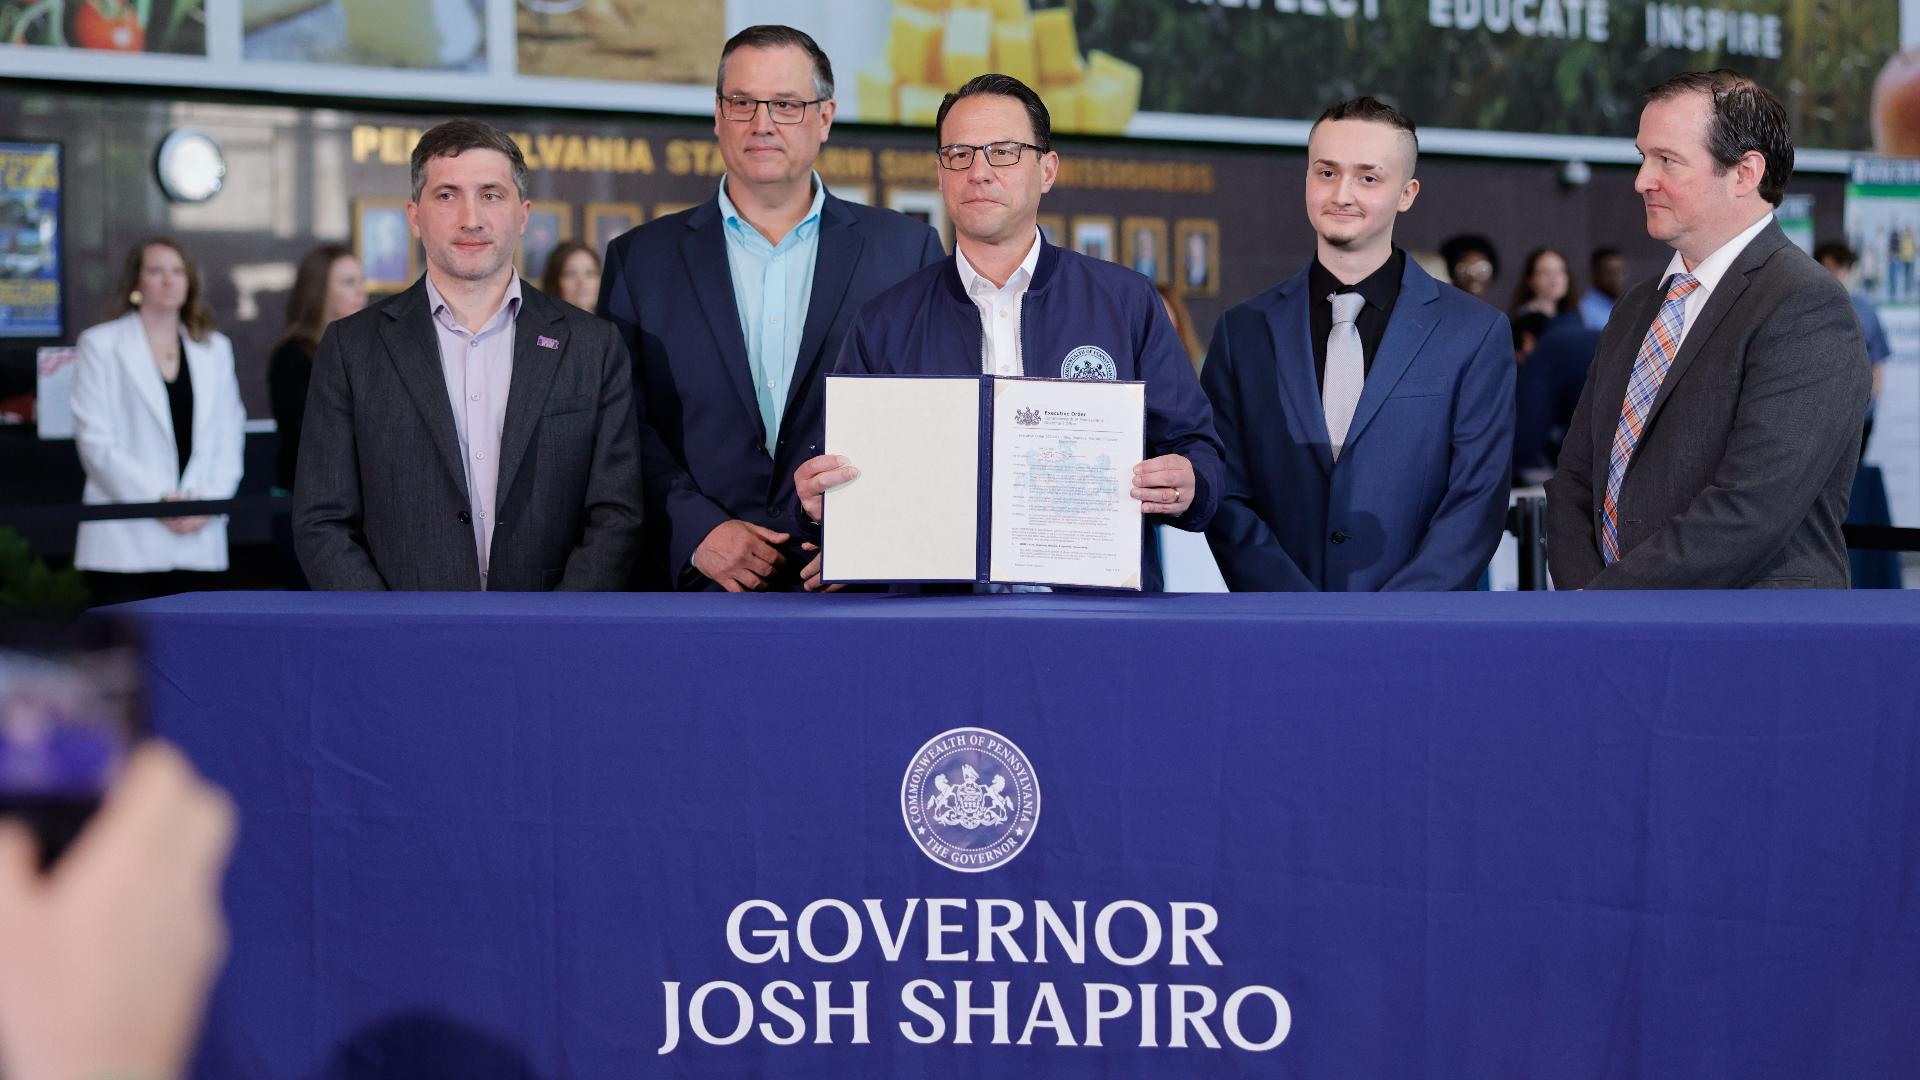 Gov. Josh Shapiro signed the executive order during the Commonwealth Job Fair in Harrisburg on Monday.